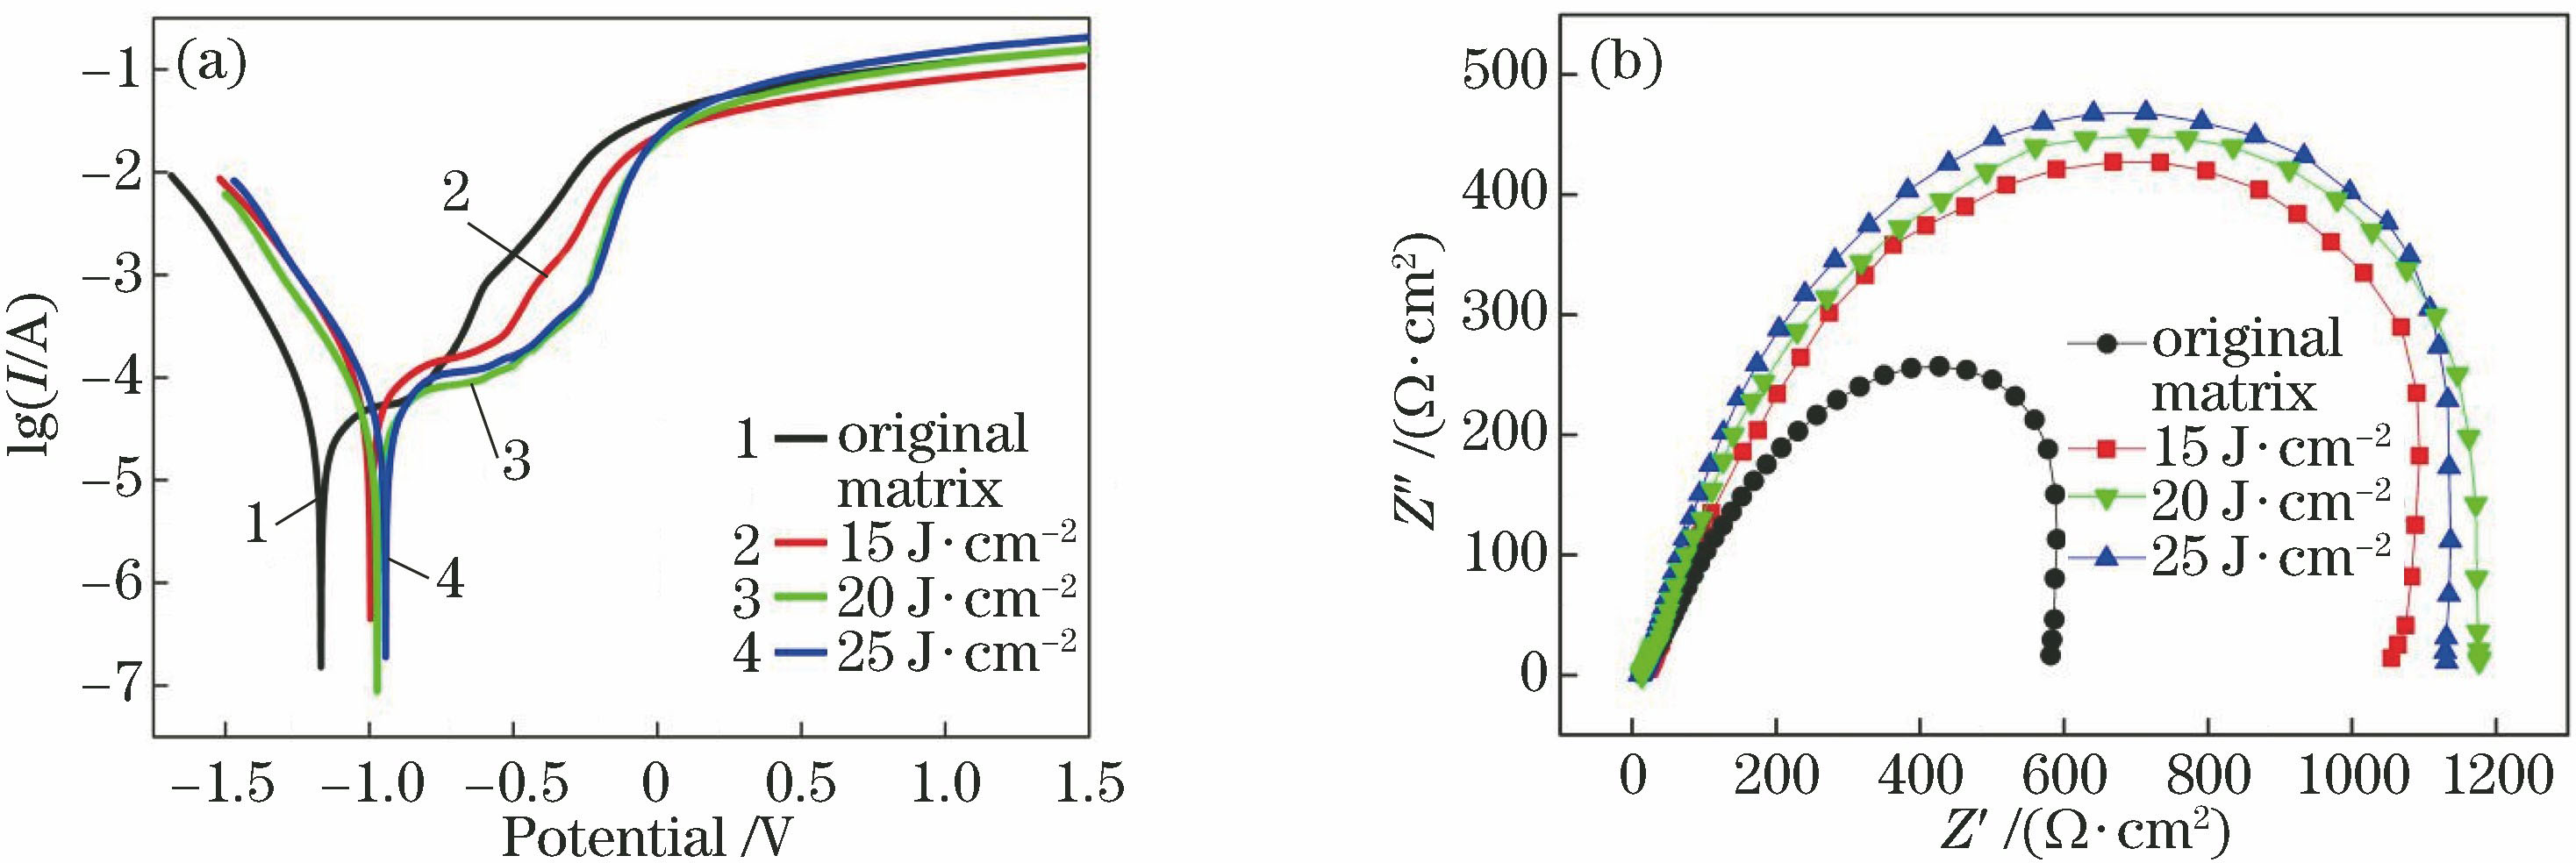 Corrosion test results of AH32 steel after cleaning at different laser energy densities. (a) Polarization curves; (b) electrochemical impedance spectroscopy